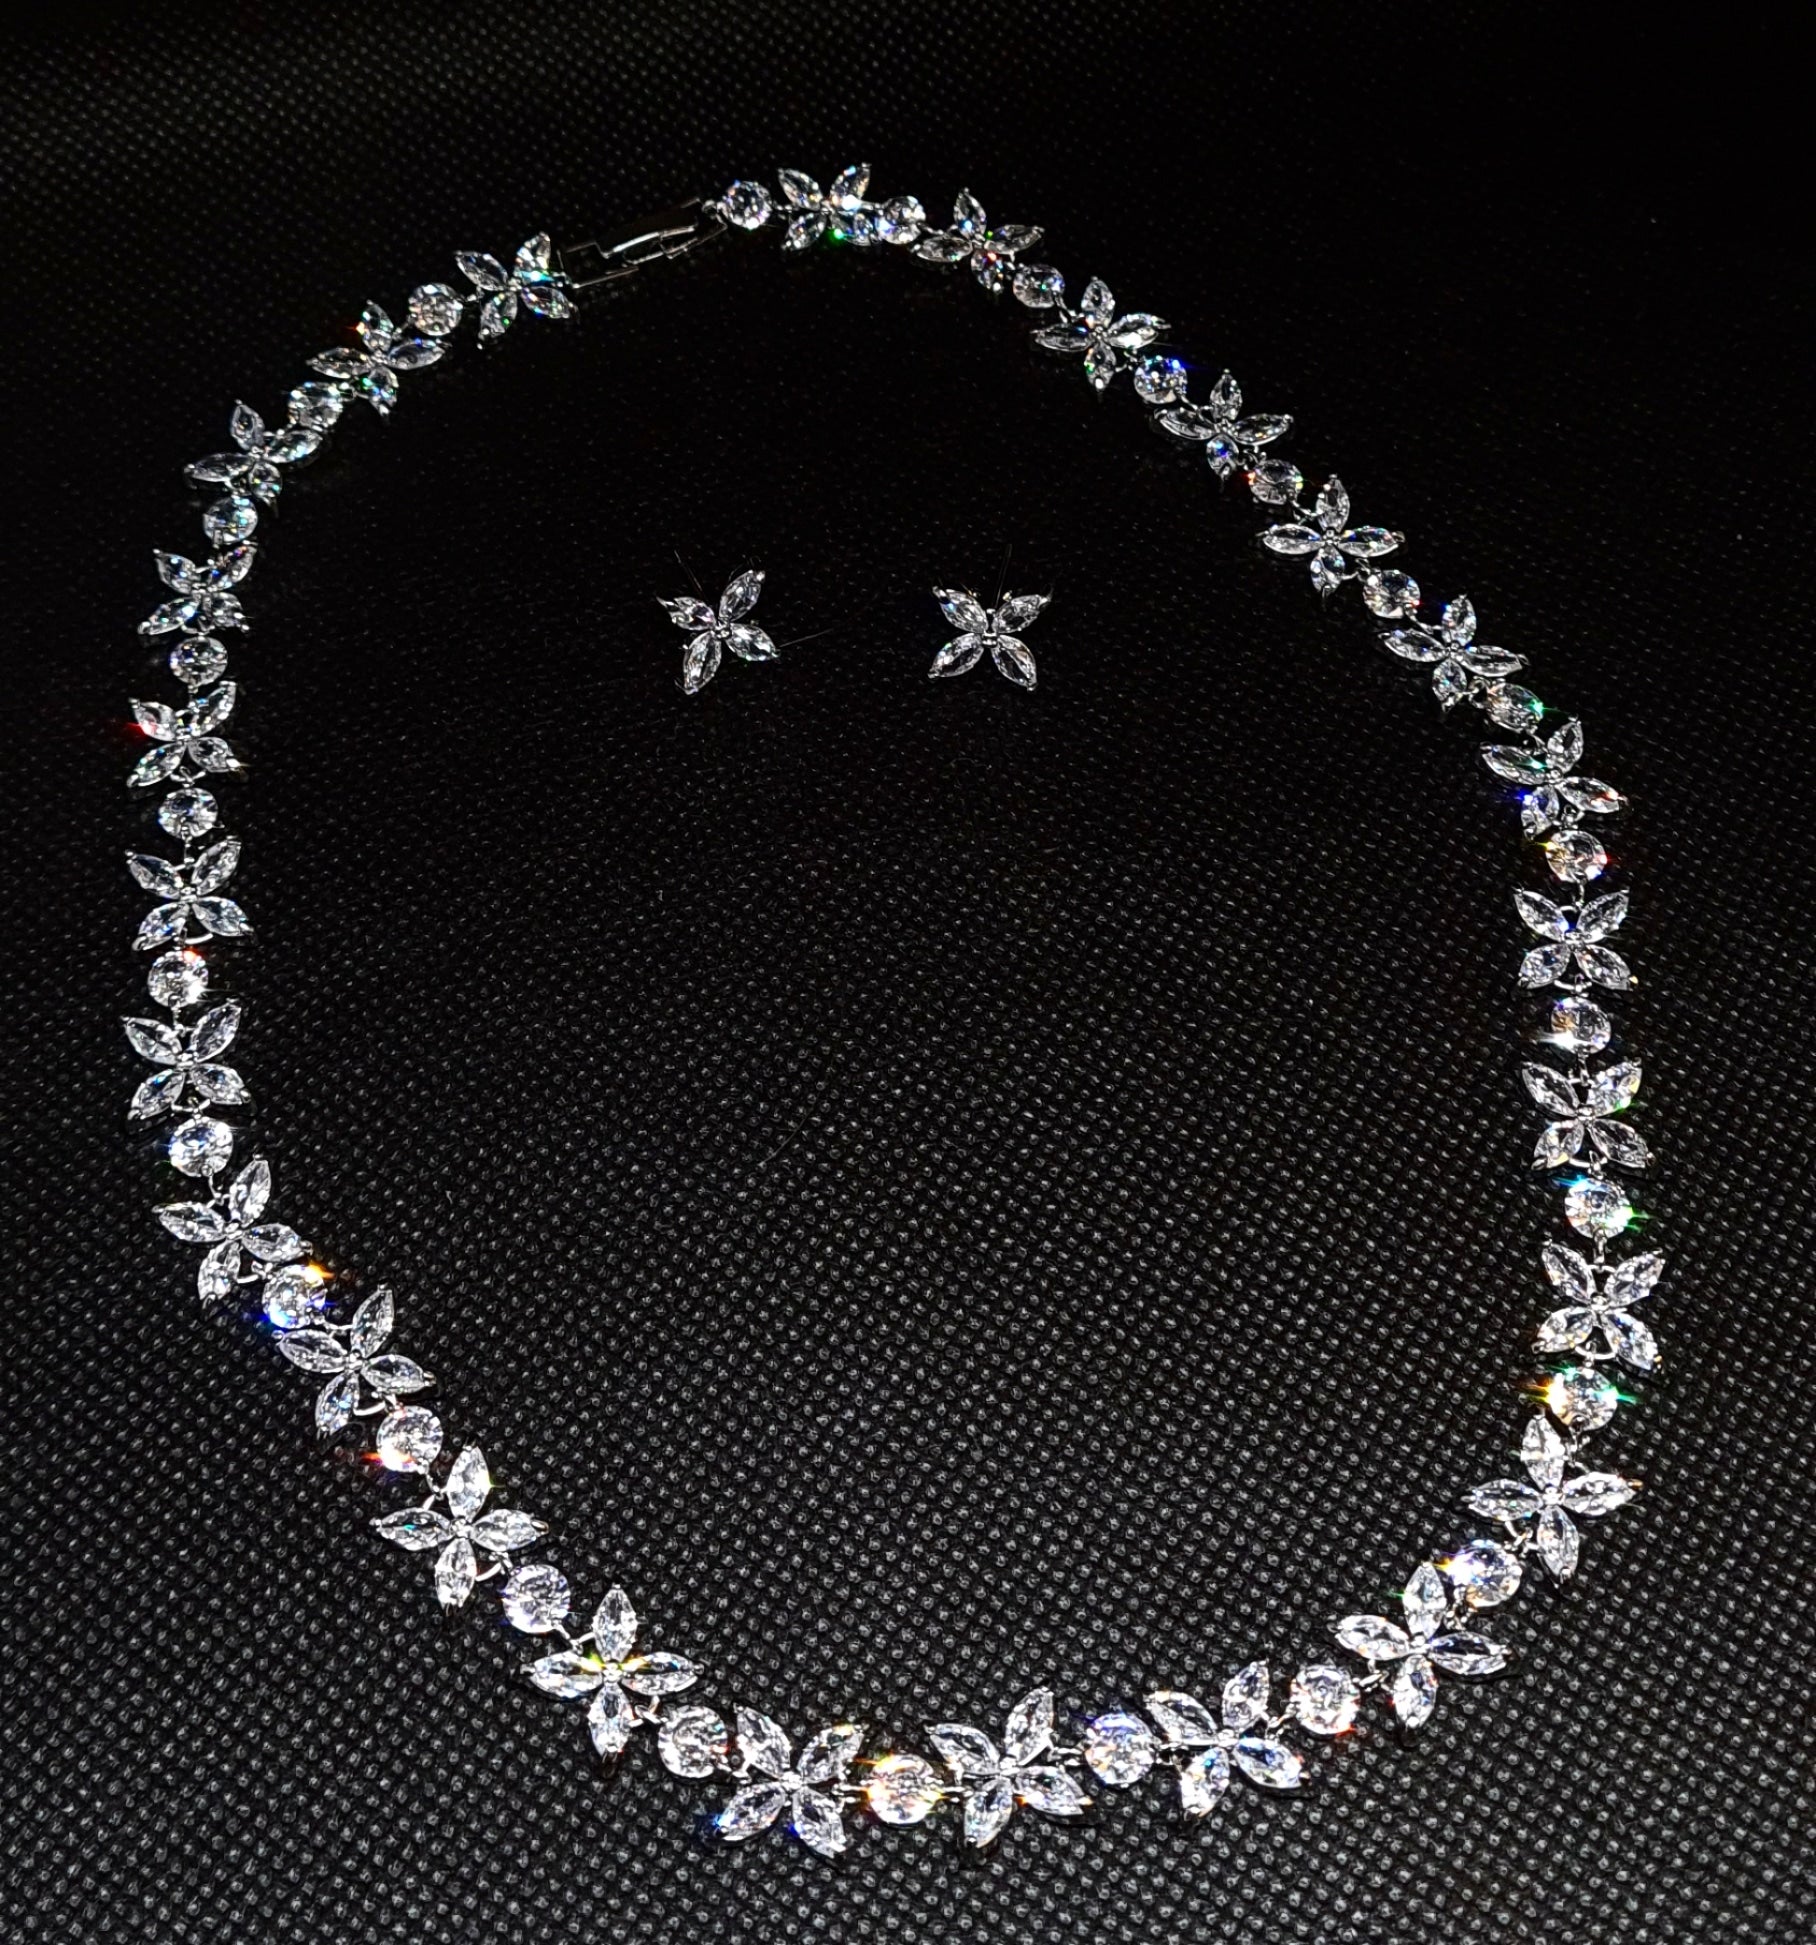 Close-up of a necklace on a mannequin. The necklace is made up of multiple strands of cubic zirconia, with a large pendant in the center. The pendant is flower-shaped and has a sparkling cubic zirconia in the center. The necklace is resting on the mannequin's neck, with matching earrings.